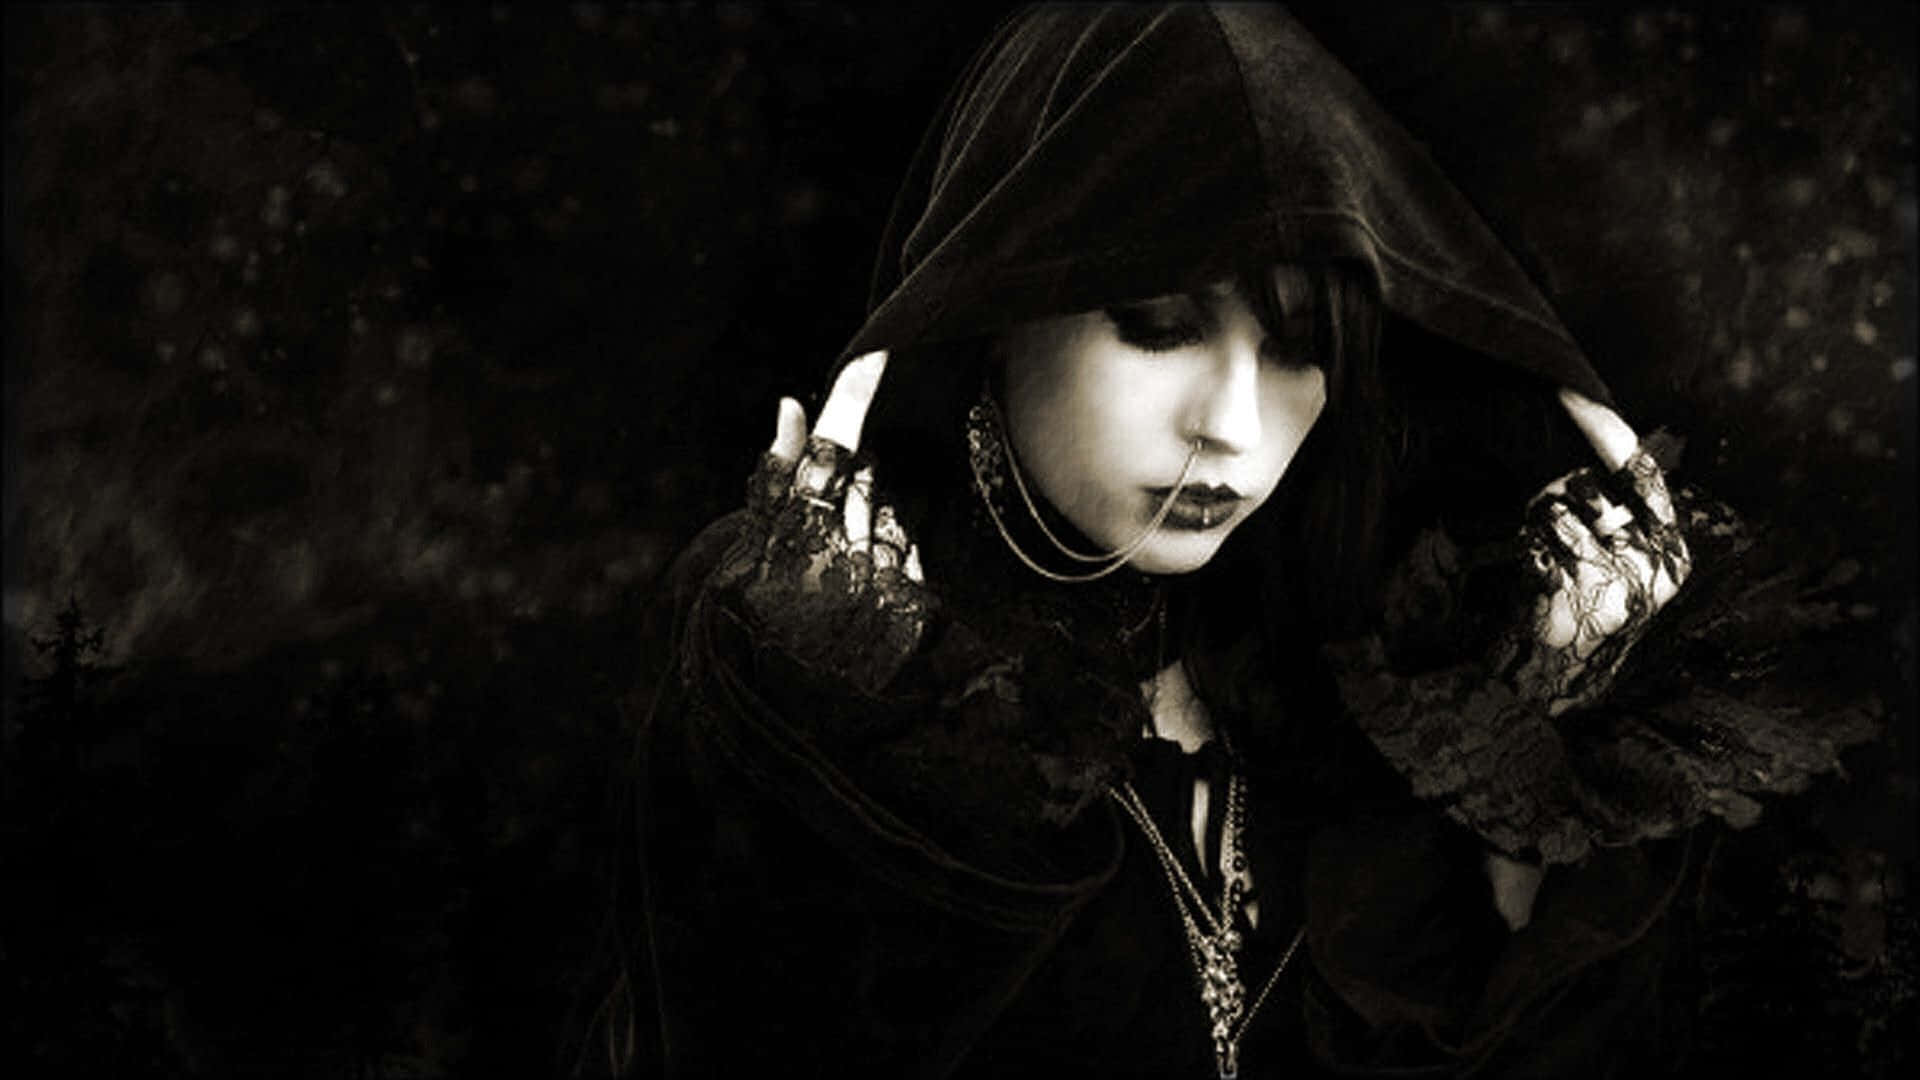 A Woman In Black With A Hood And A Necklace